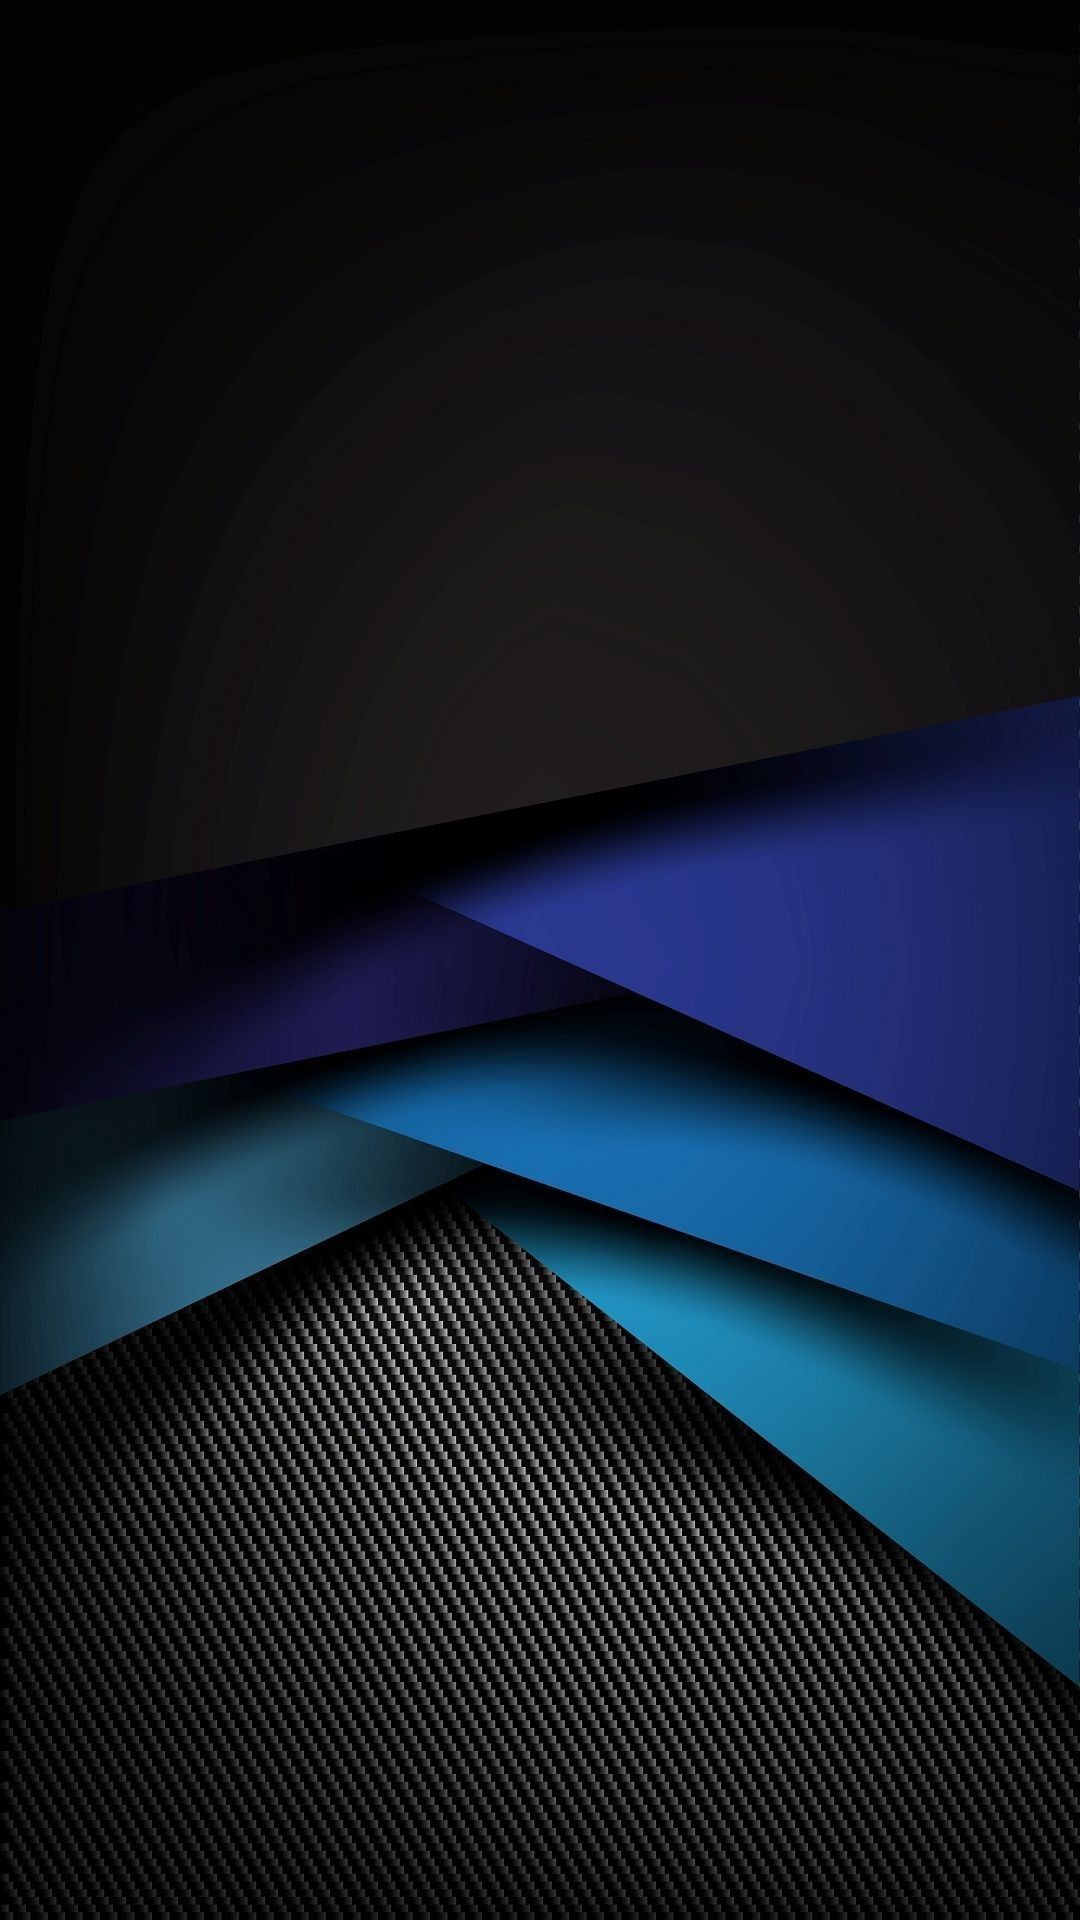 1080x1920, Black And Blue Geometric Abstract Wallpaper - Blue And Black  Abstract - 1080x1920 Wallpaper 